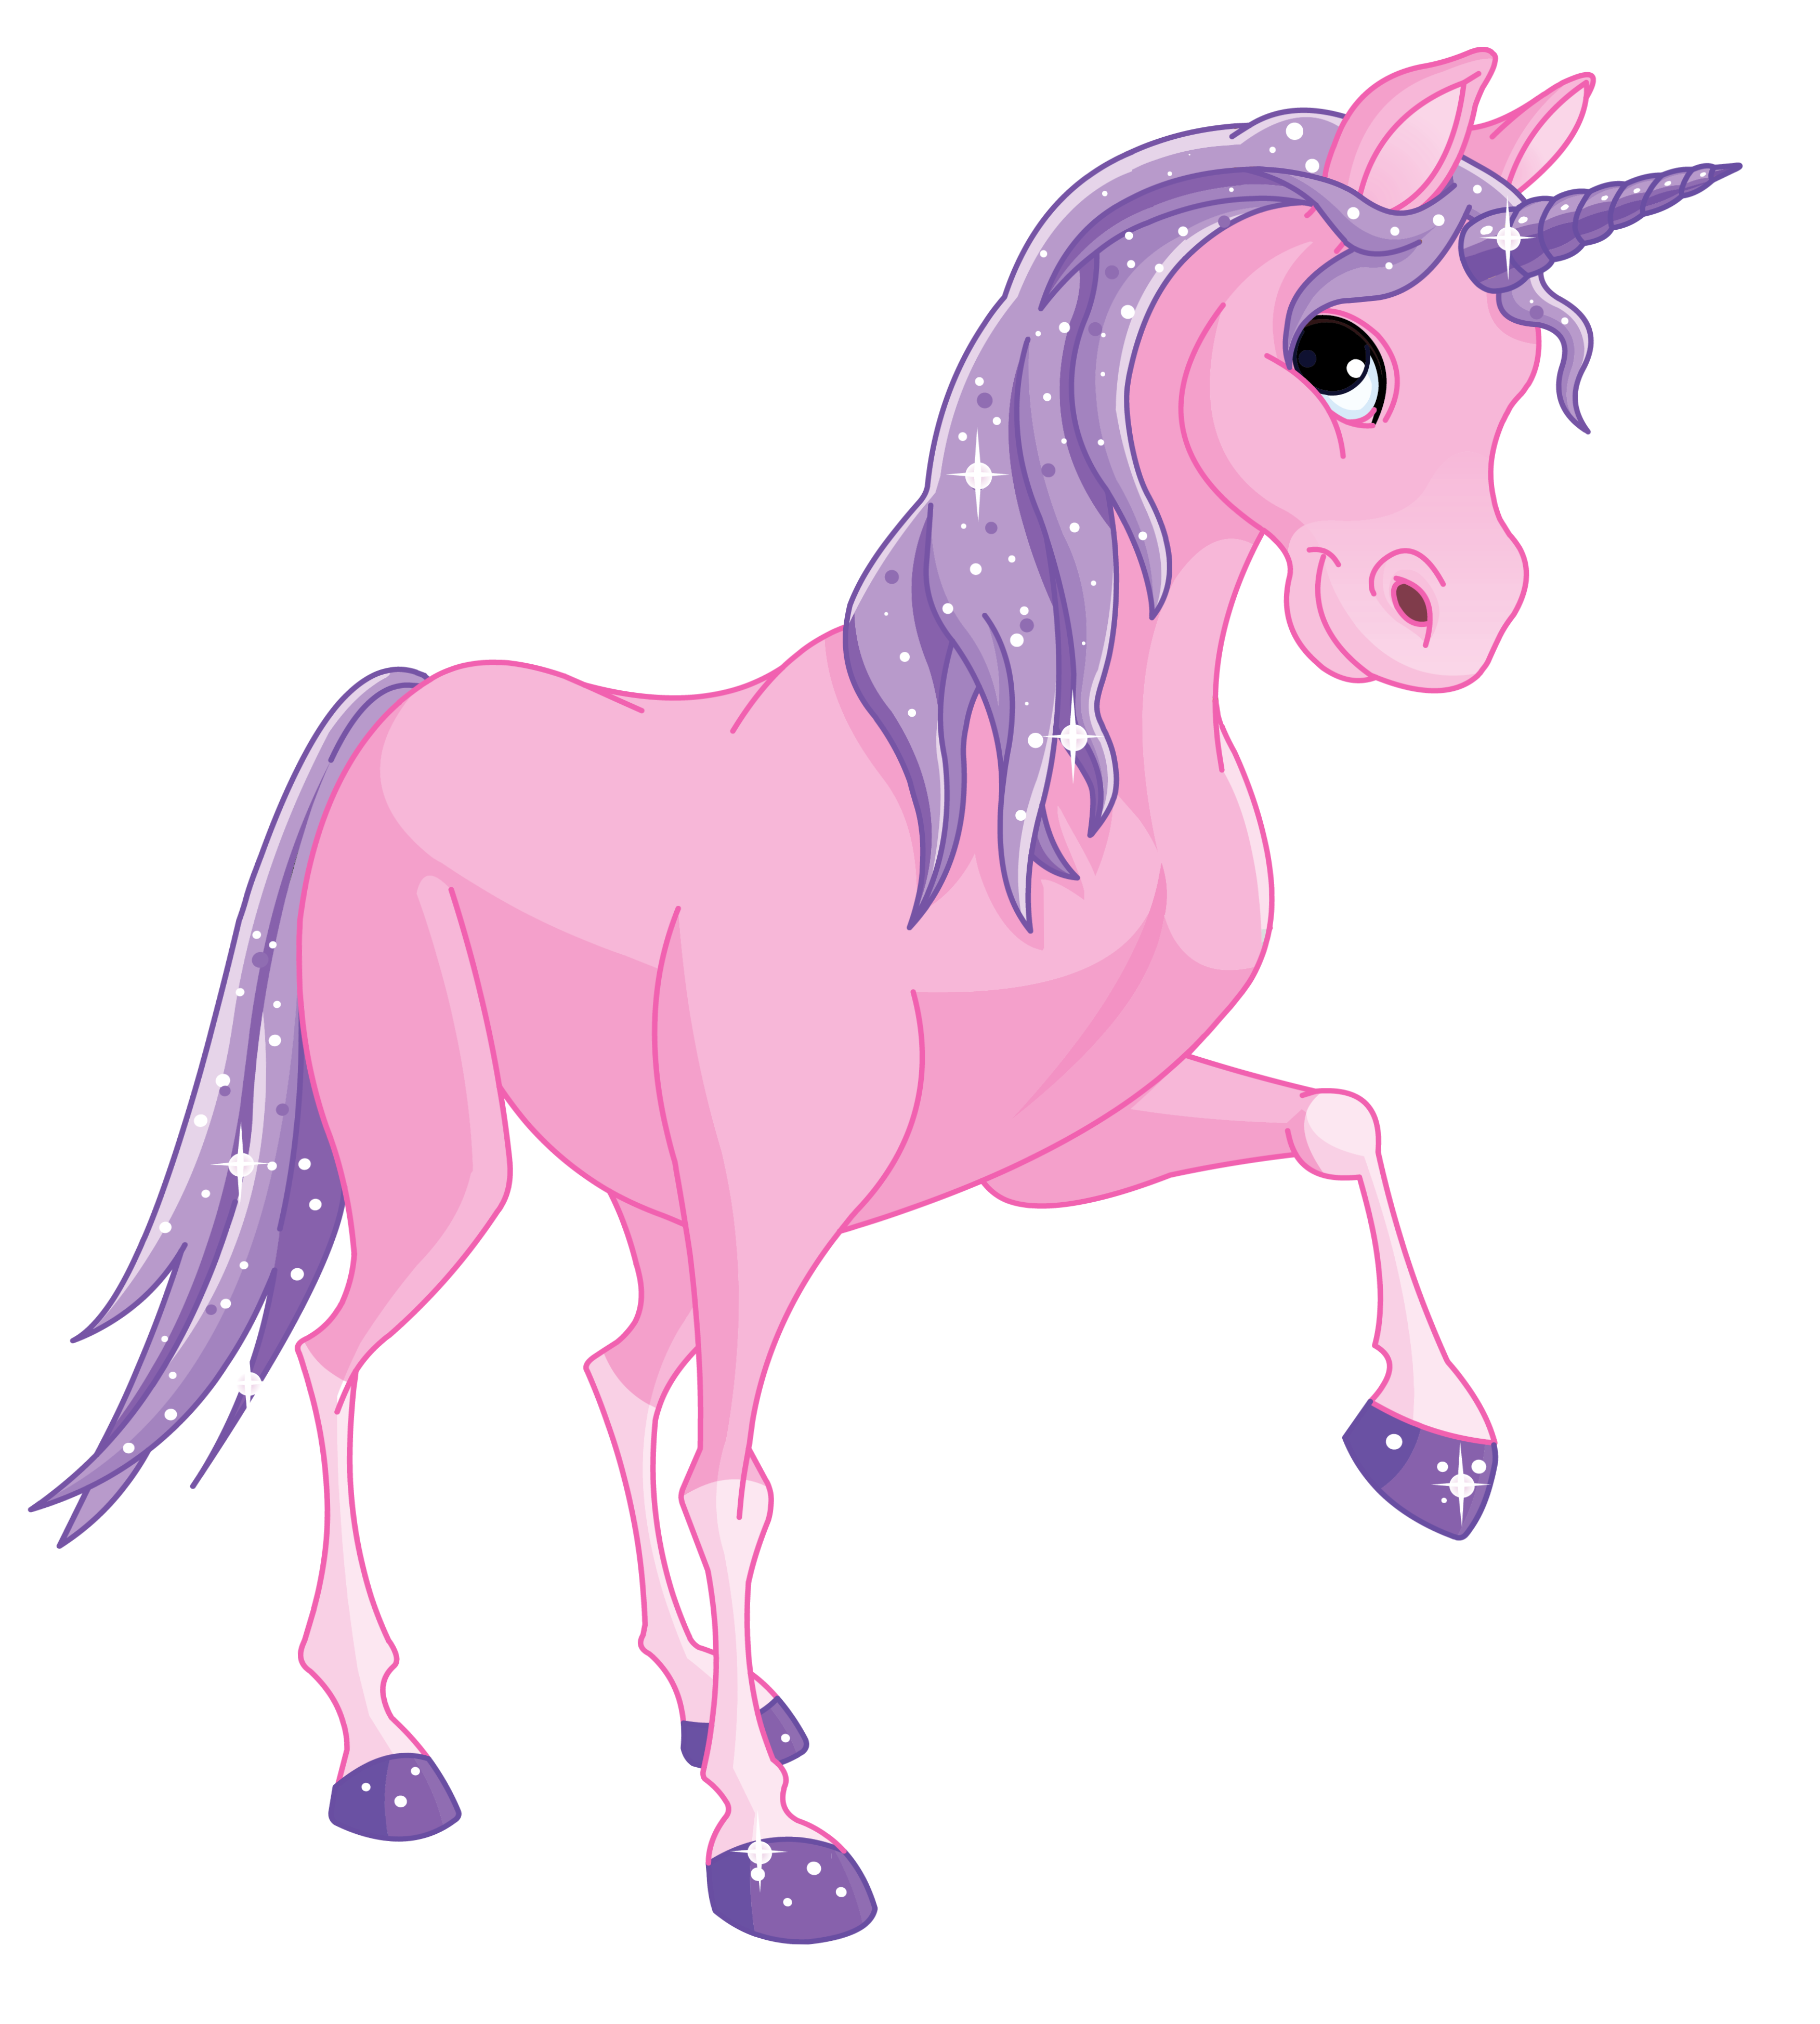 Pink Little Pony PNG Clipart Image​  Gallery Yopriceville - High-Quality  Free Images and Transparent PNG Clipart